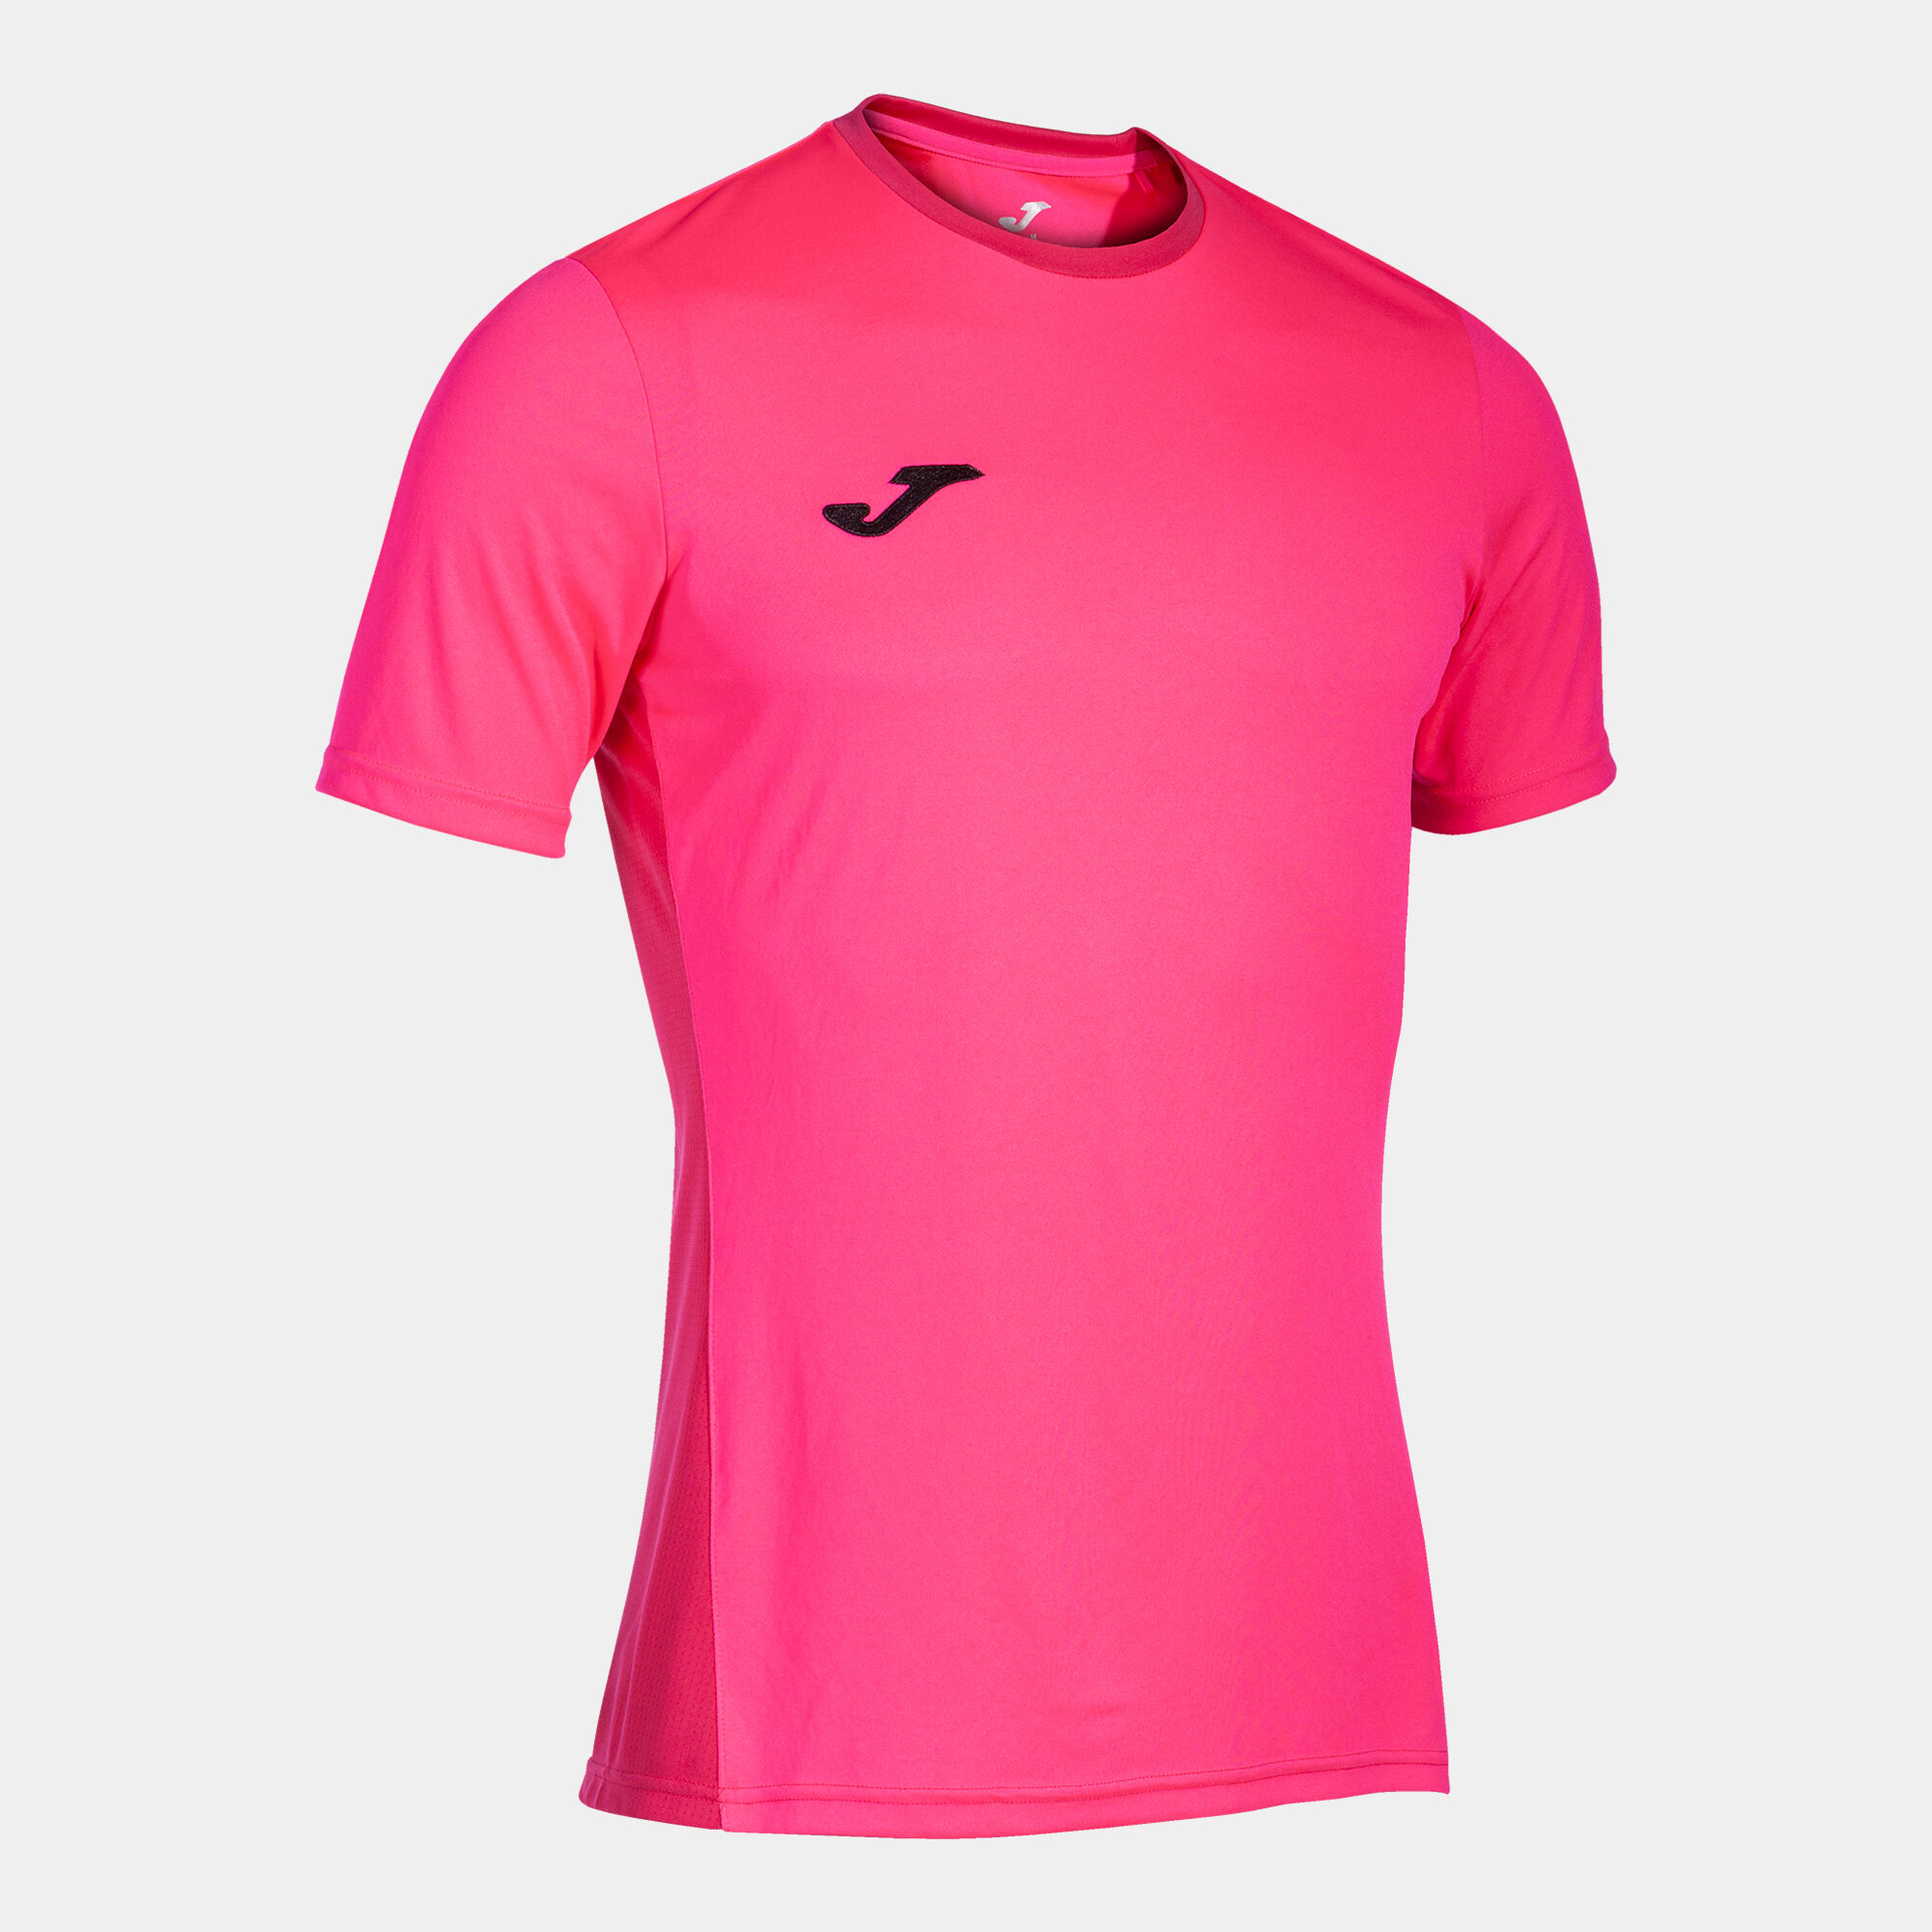 MAILLOT MANCHES COURTES HOMME WINNER II ROSE FLUO